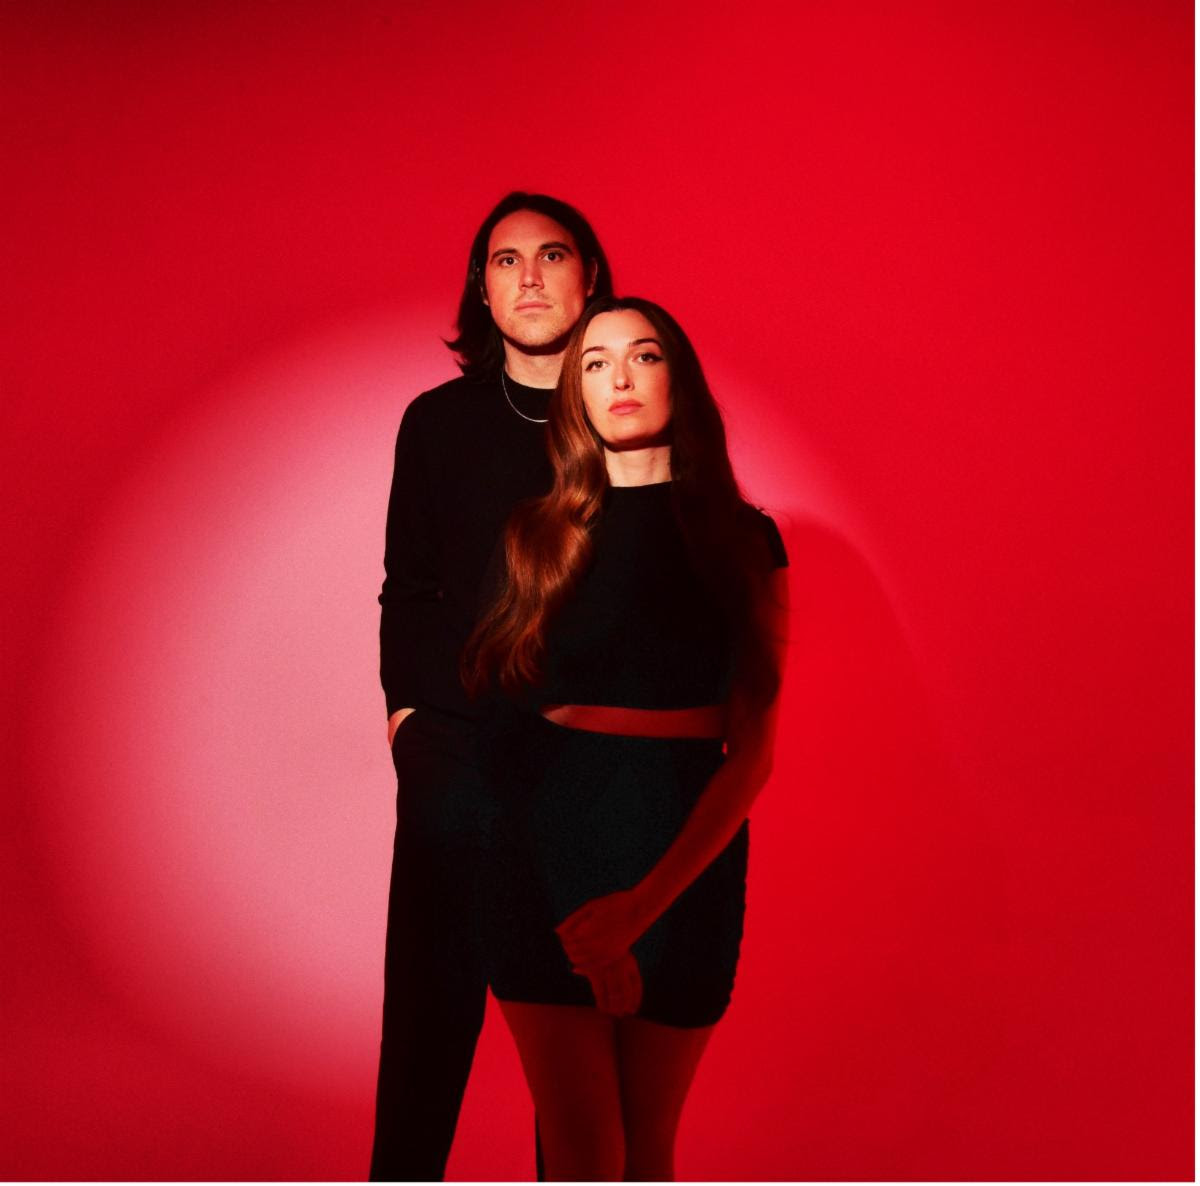 Our week is getting better: Cults Drops New Single “Crybaby” northerntransmissions.com/cults-drops-ne… #NewMusicAlert